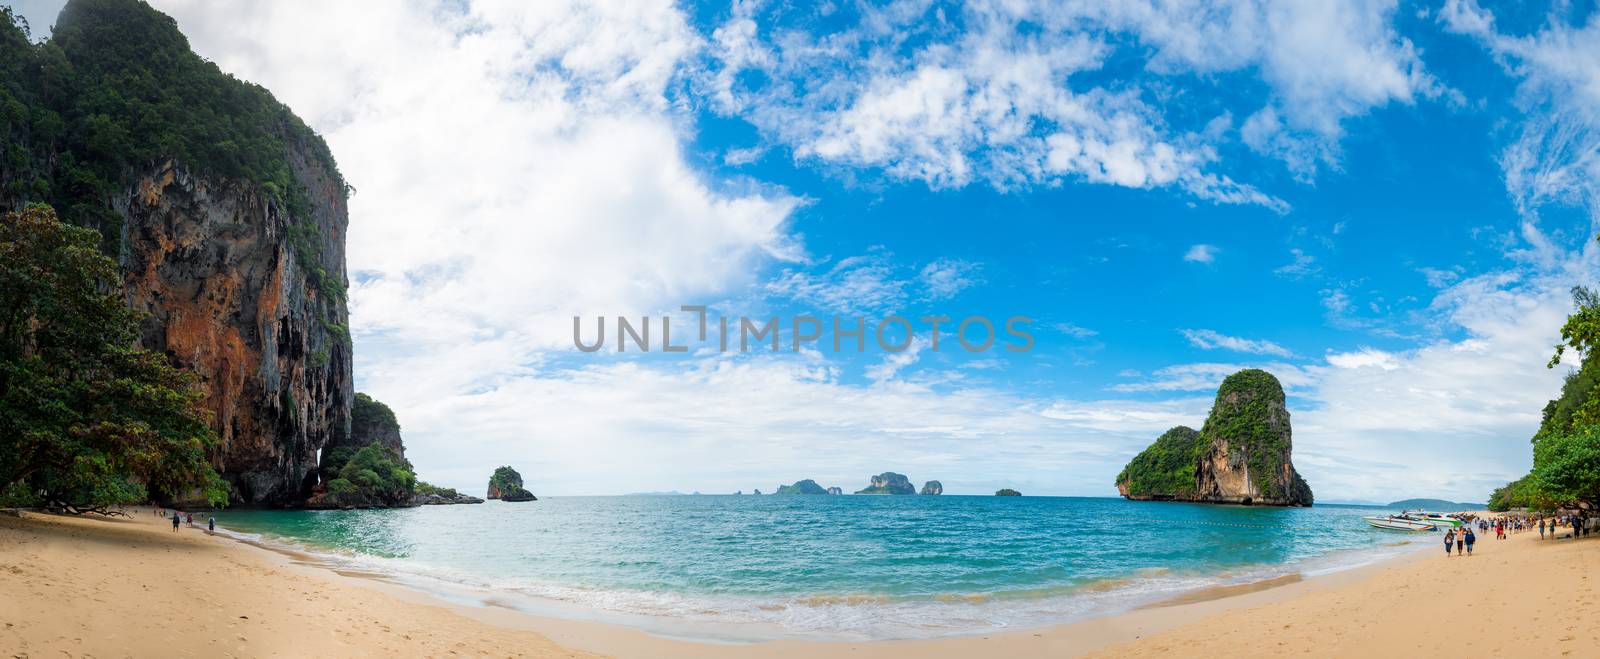 Beach Phra Nang on a sunny day panoramic view, tourists in the f by kosmsos111